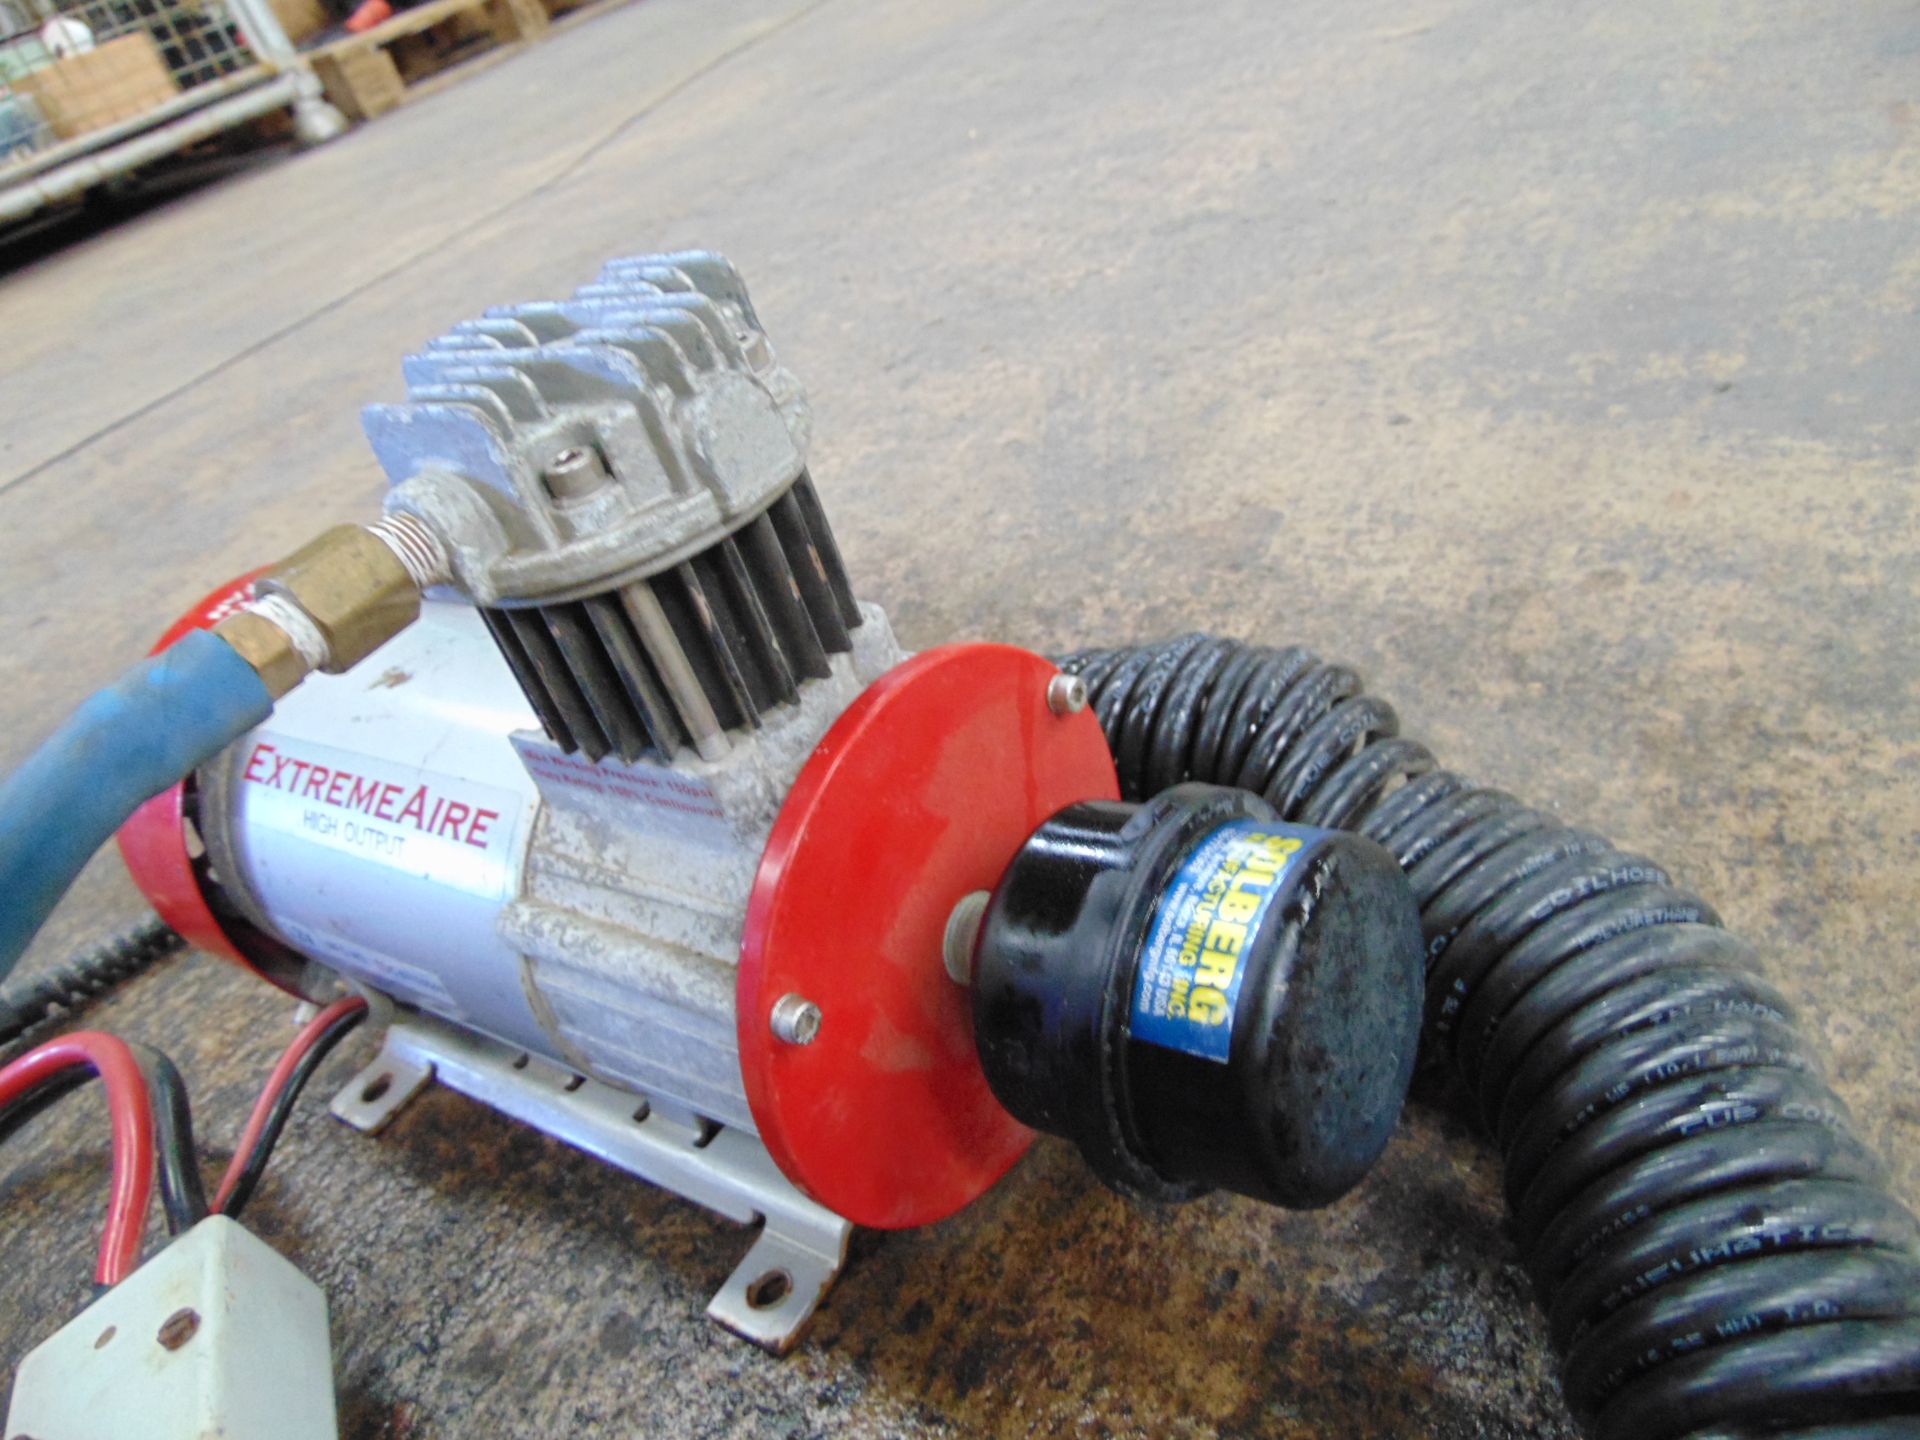 Extremeaire 12V Air Compressor - Image 3 of 6